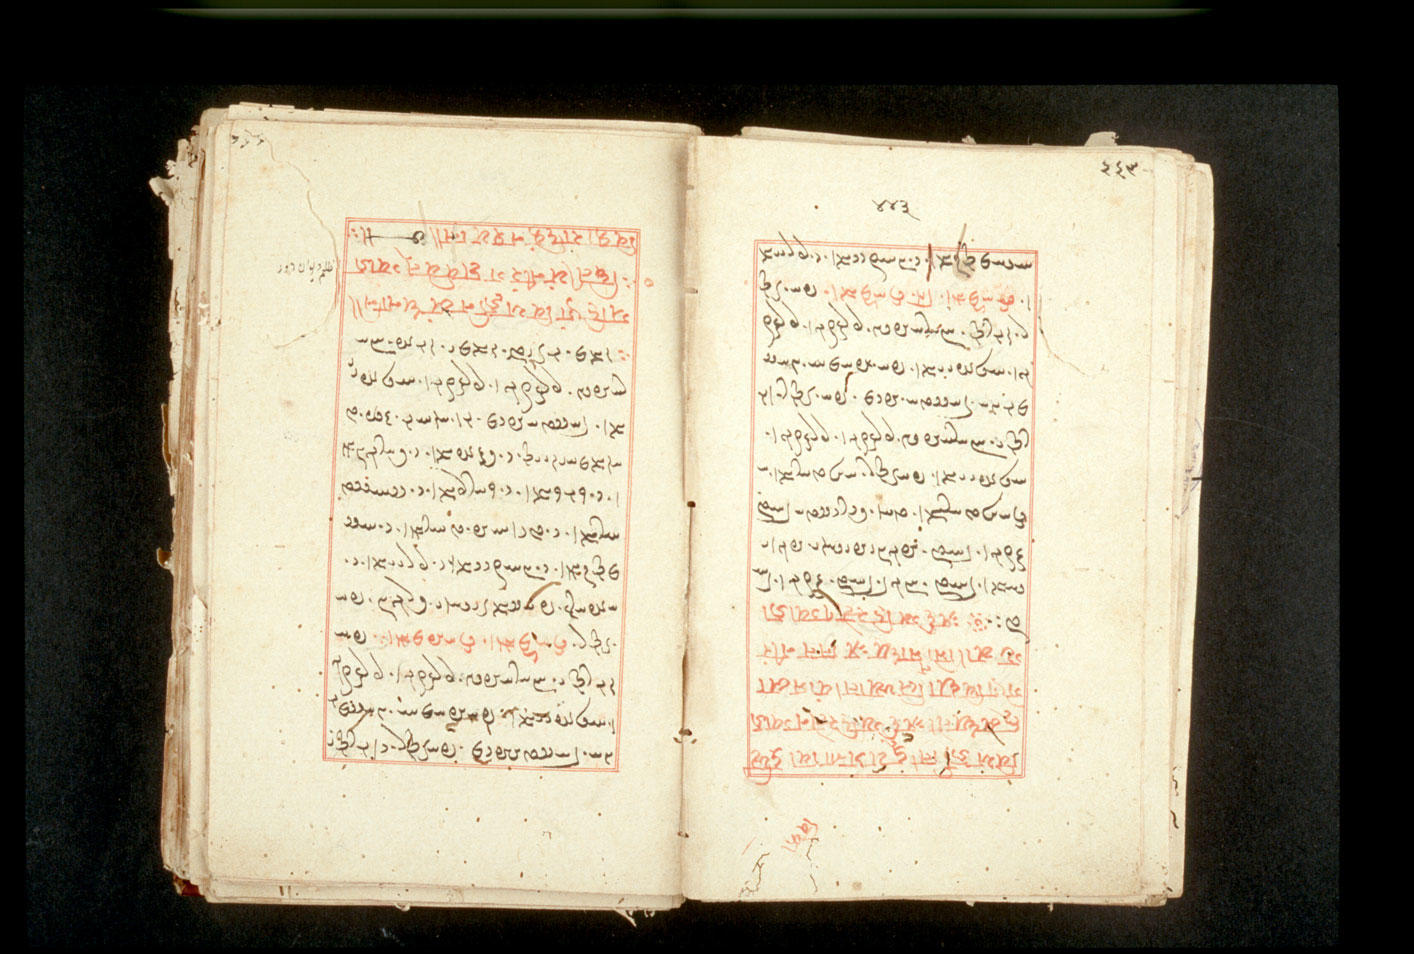 Folios 443v (right) and 444r (left)